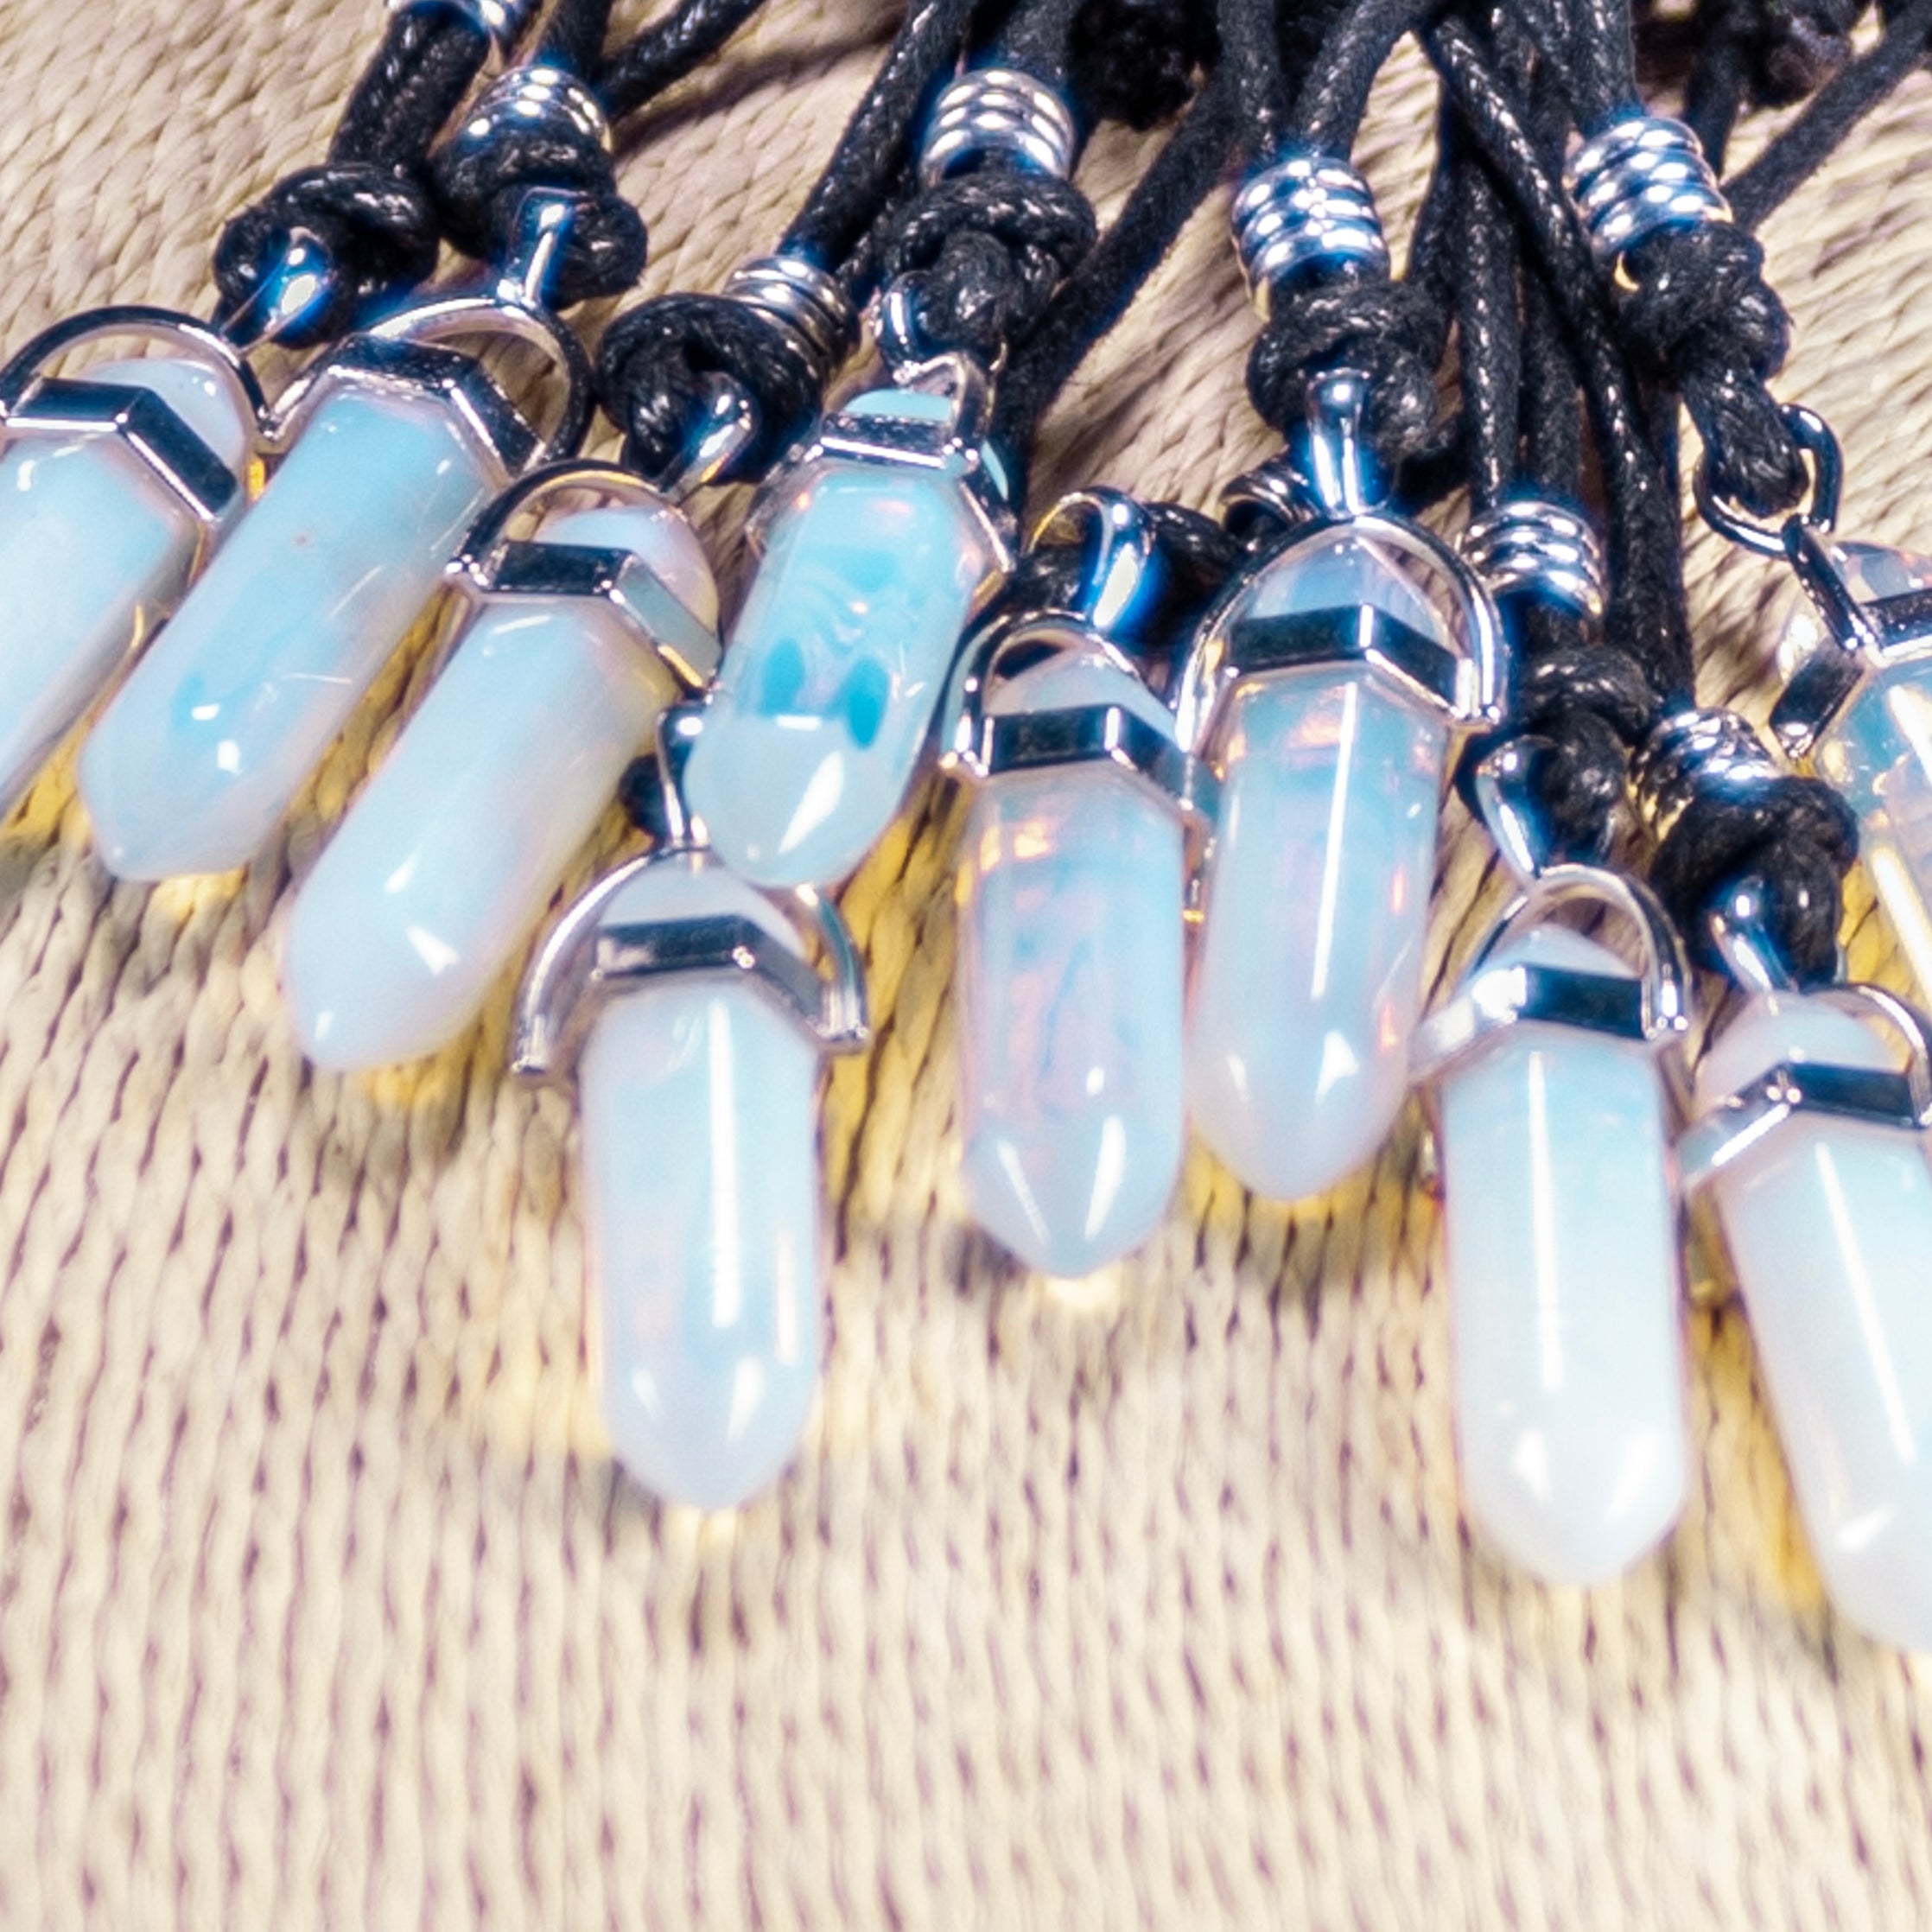 Opalite Pendant on Adjustable Rope Necklace